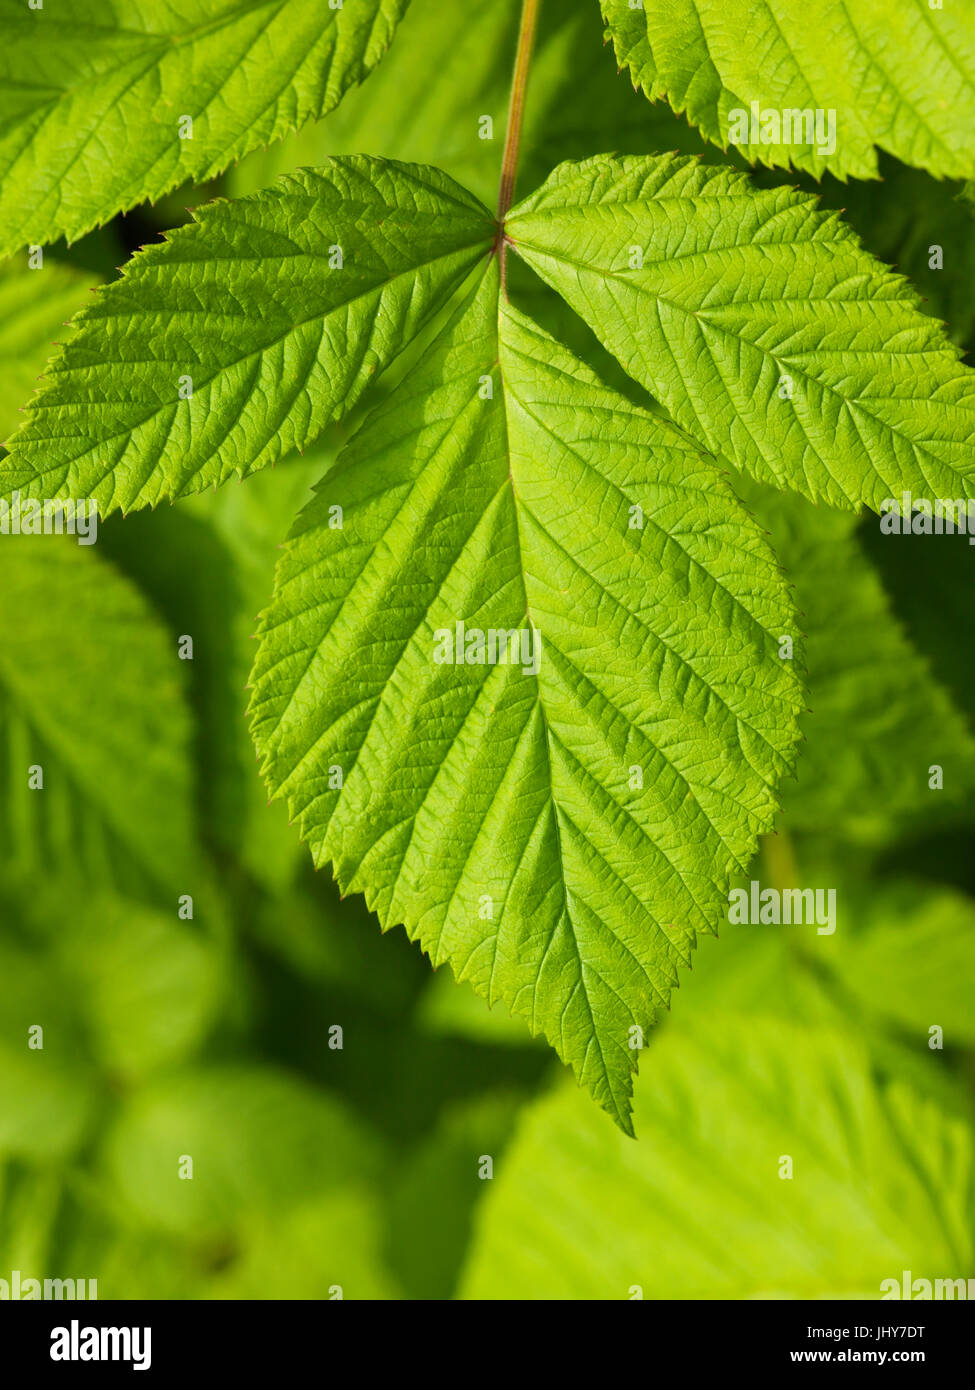 Sheets of the raspberry - Leafs of raspberry, Blätter der Himbeere - Leafs of raspberry Stock Photo